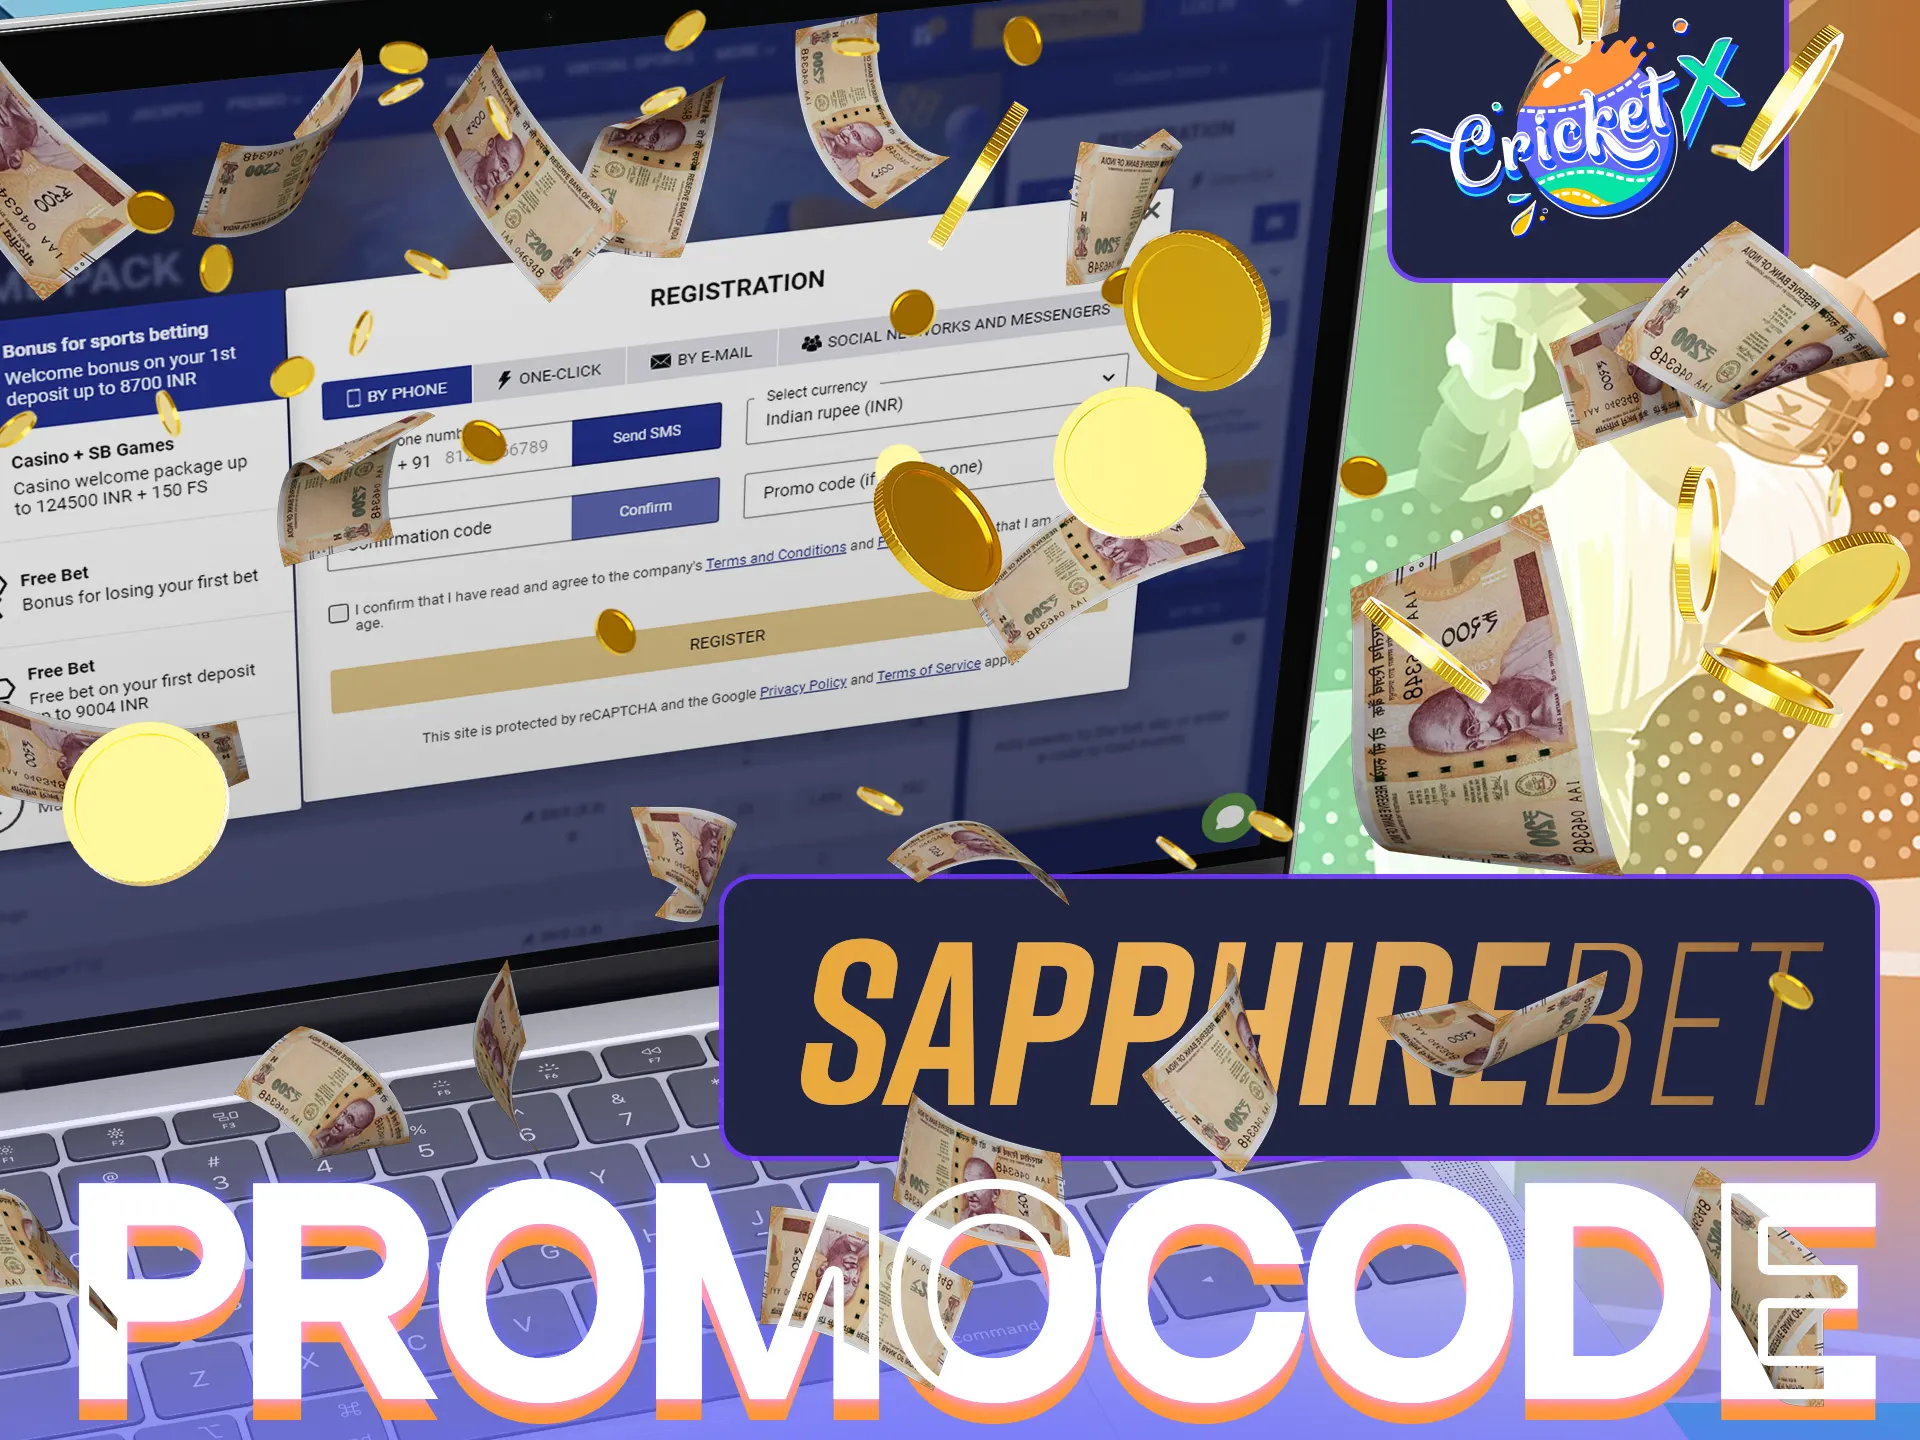 SapphireBet's Cricket X Promo Code doubles winnings for newcomers.